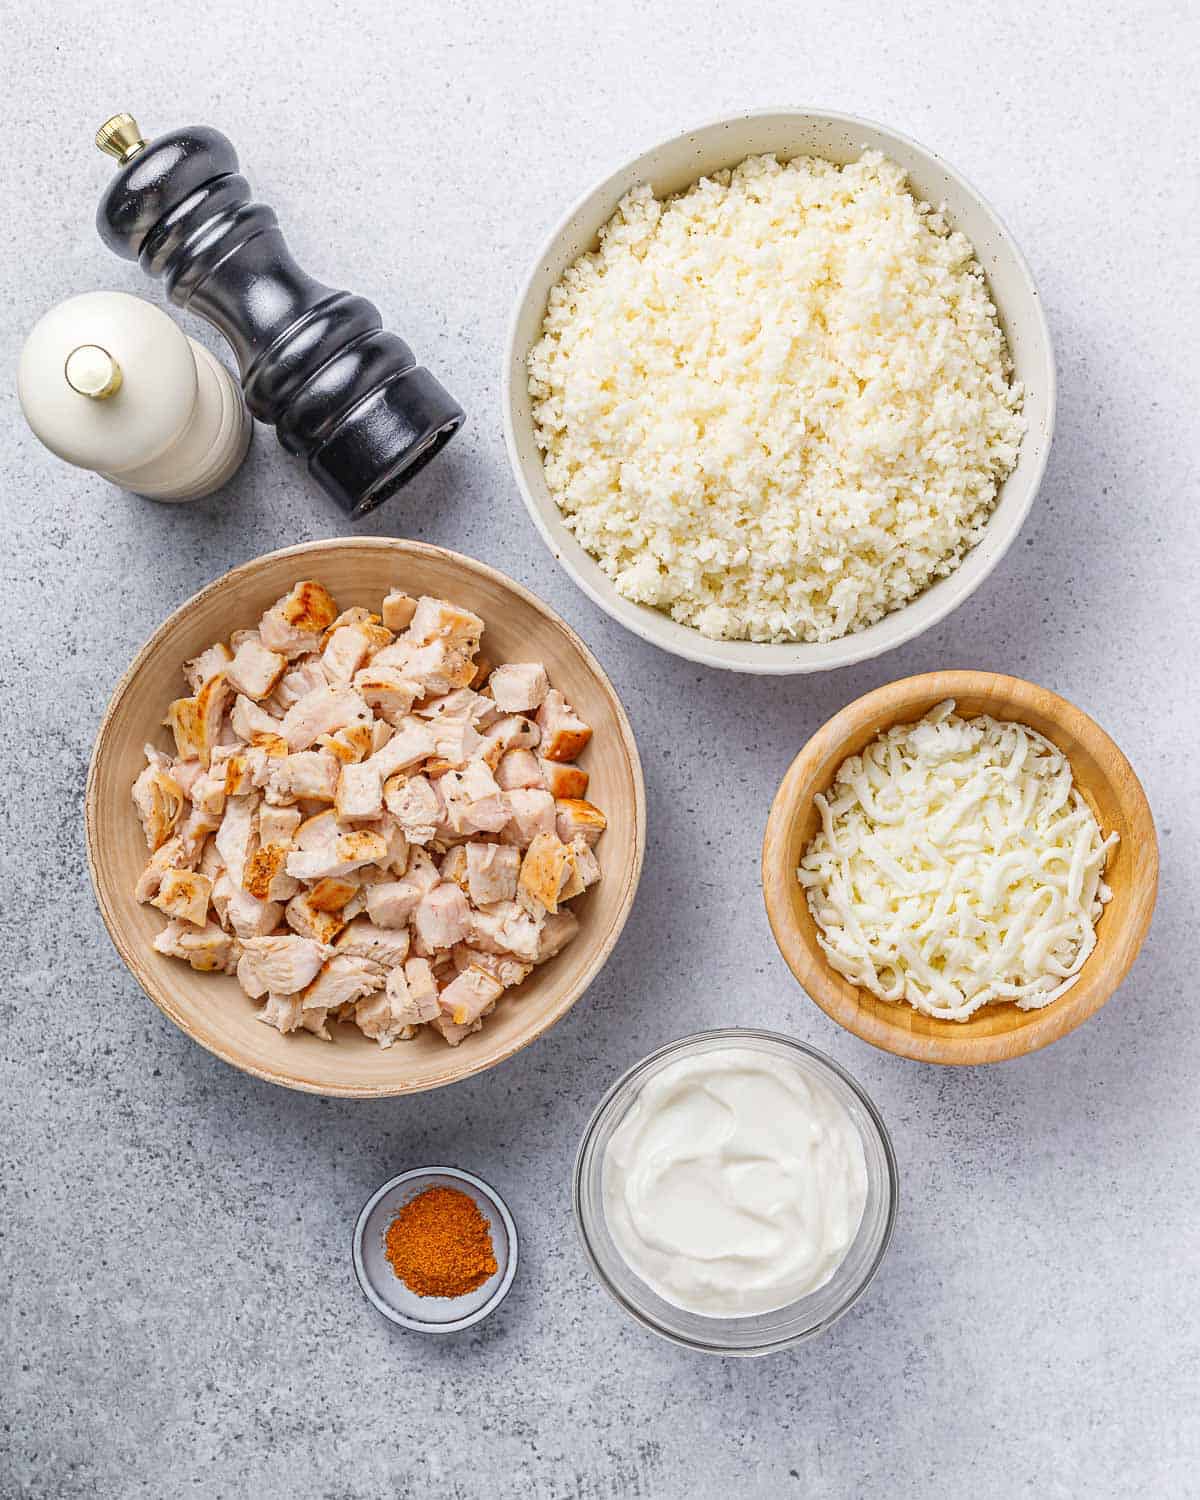 Chopped chicken, cauliflower rice, cheese and sour cream divided into small bowls.